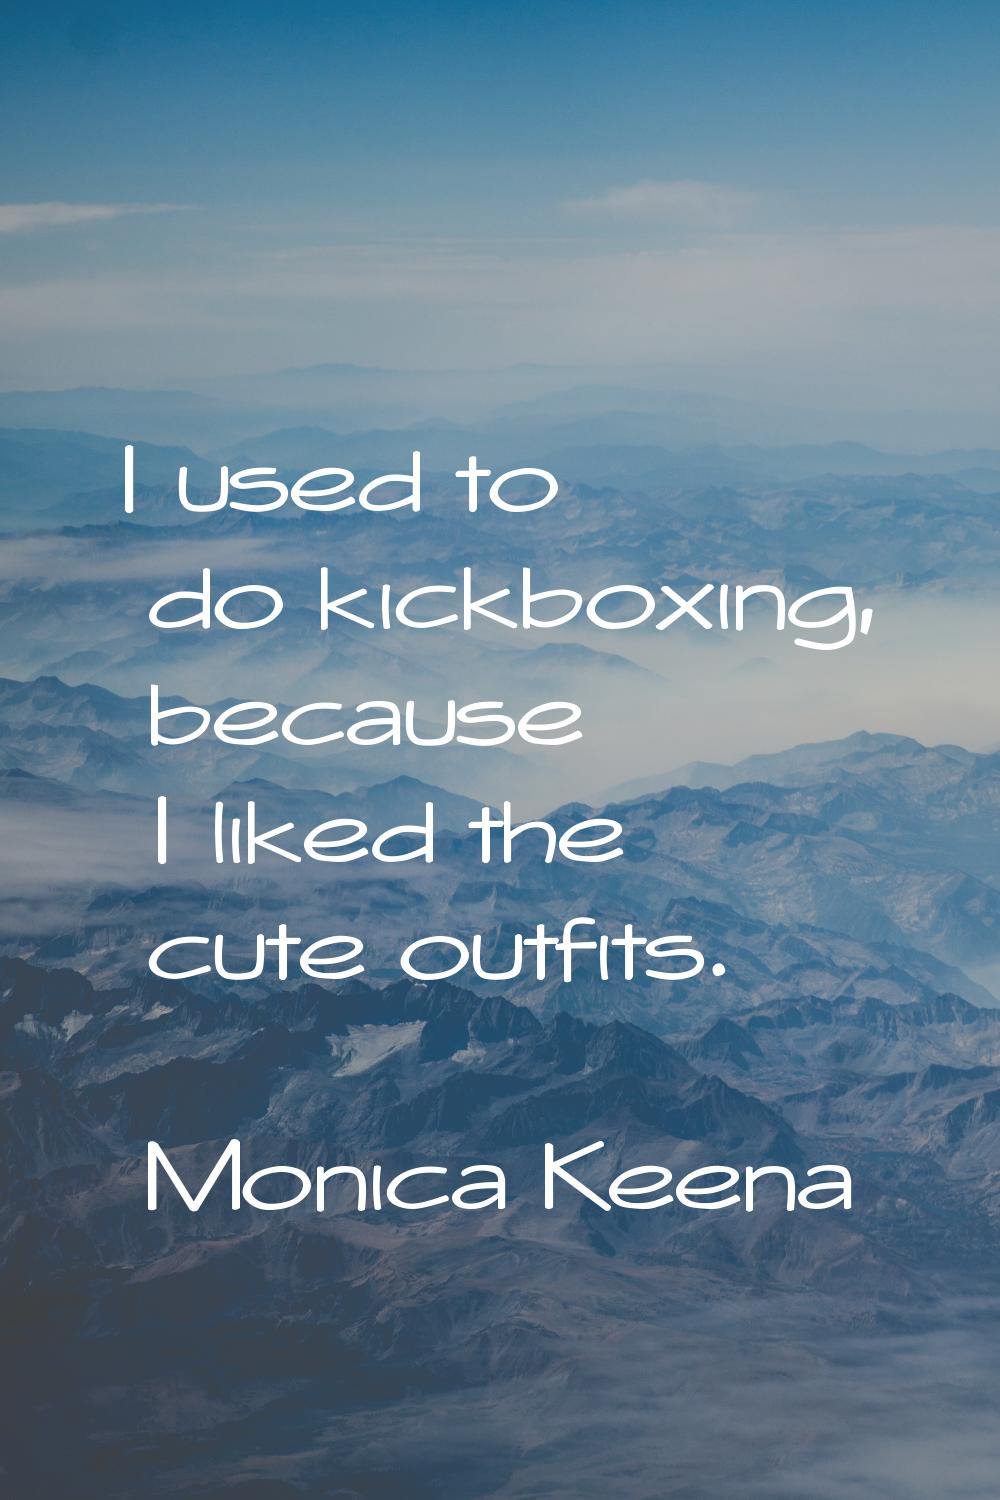 I used to do kickboxing, because I liked the cute outfits.